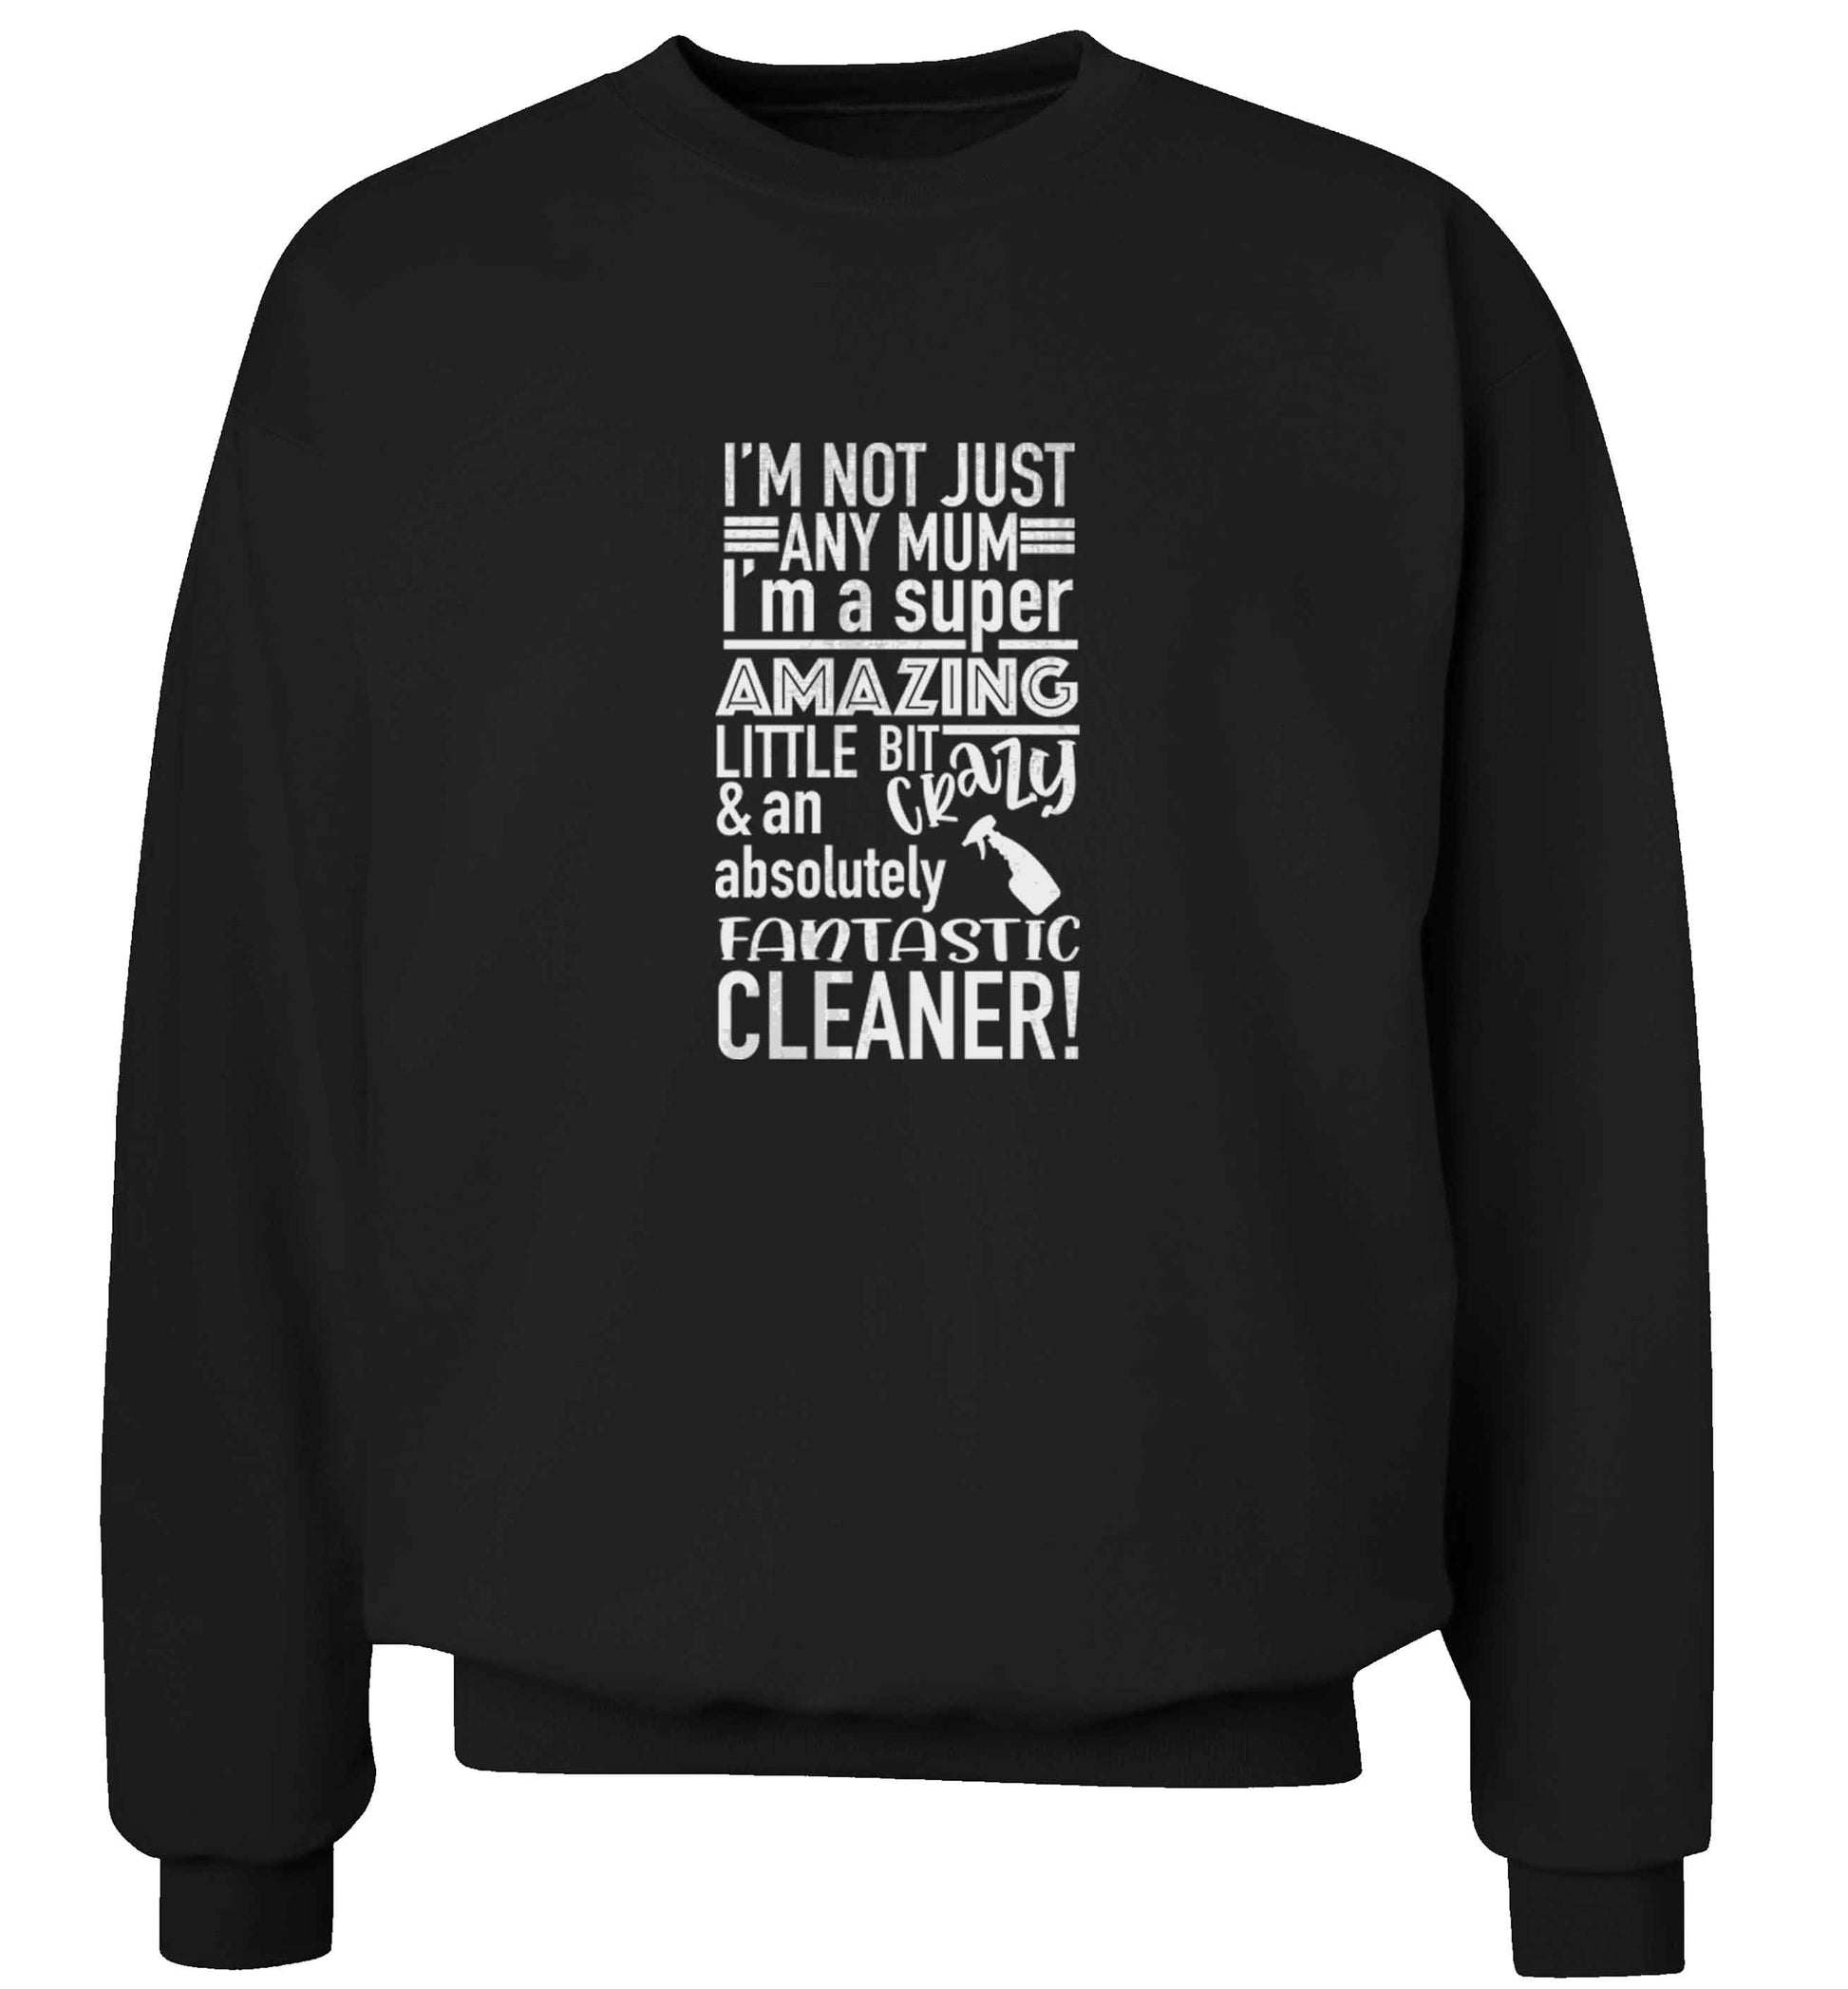 I'm not just any mum I'm a super amazing little bit crazy and an absolutely fantastic cleaner! adult's unisex black sweater 2XL